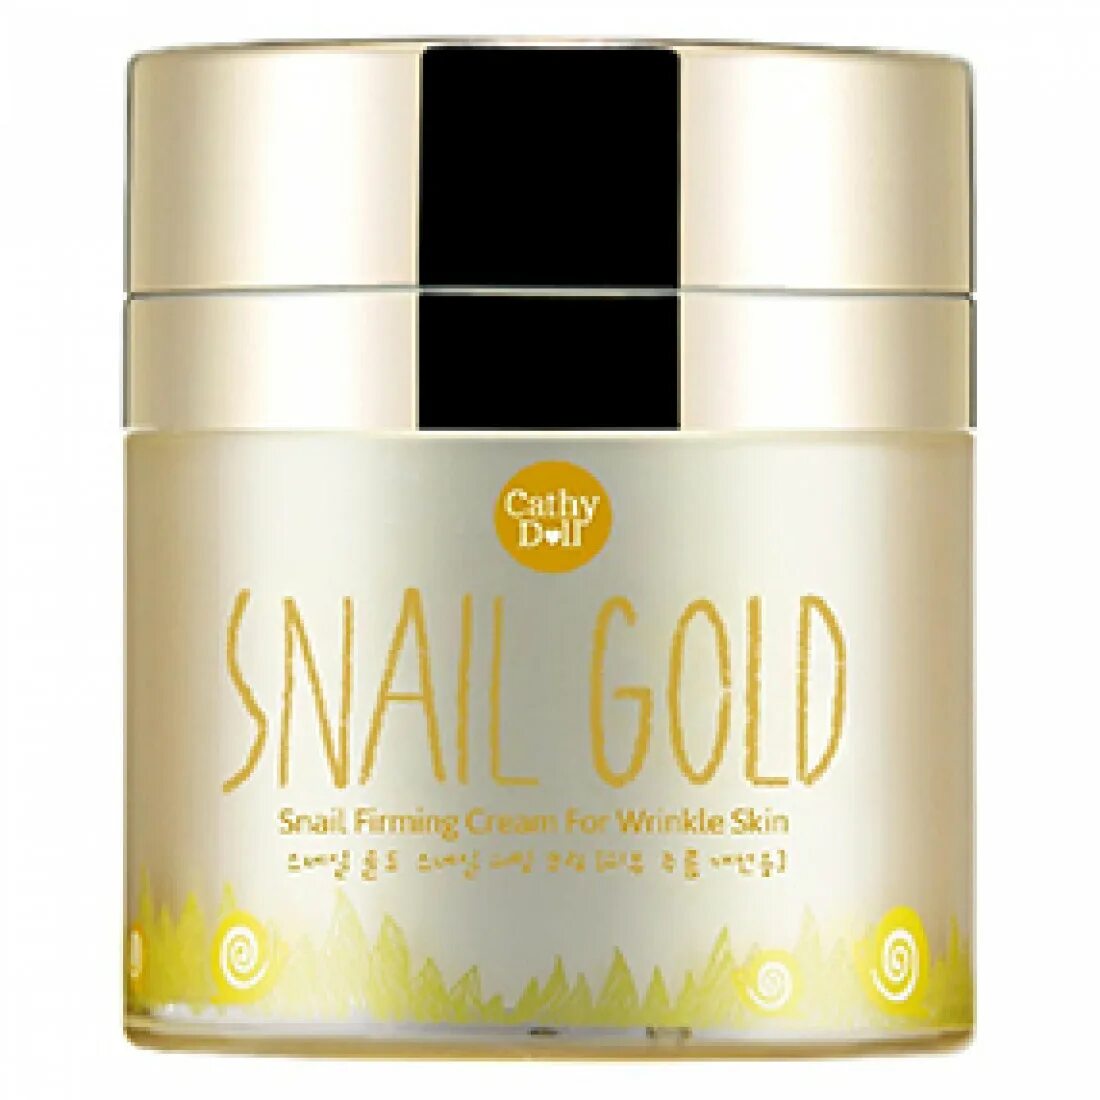 Крем Cathy Doll Snail Gold. Cathy Doll Snail Gold Snail Firming Cream for Wrinkle Skin. Snail Gold Firming Cream. Snail Gold крем Тайланд Cathy Doll.